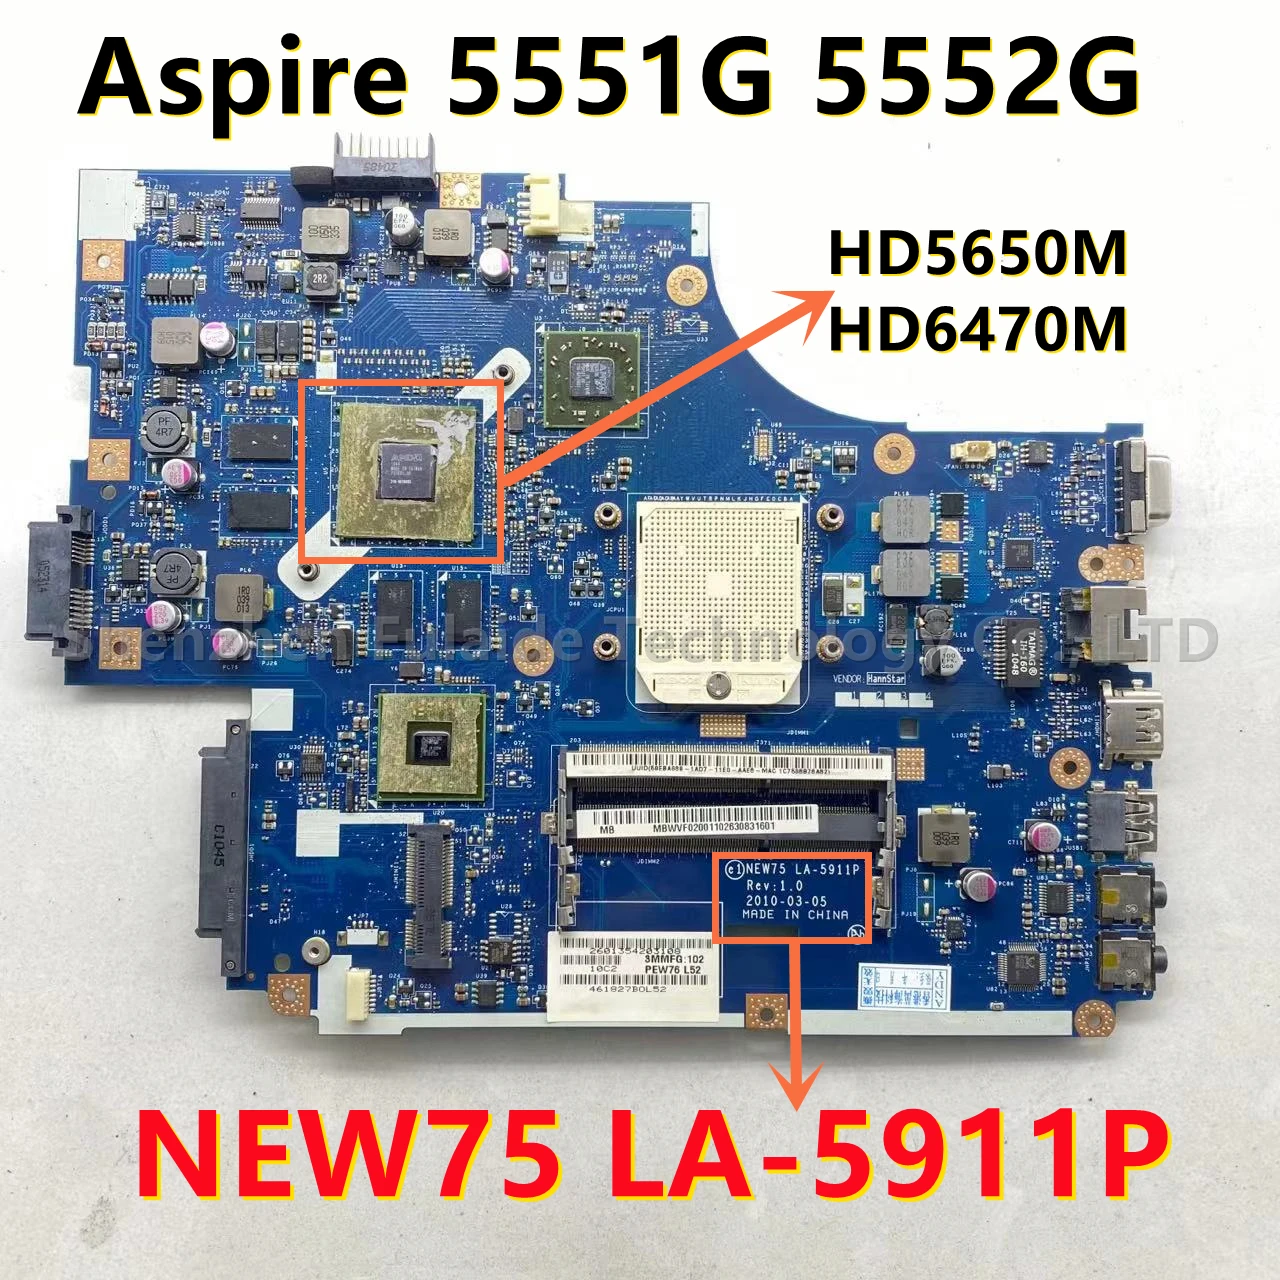 NEW75 LA-5911P Mainboard For Acer Aspire 5551G 5552G Laptop Motherboard MBPUU02001 MB.WVE02.001 With HD5650M HD6470M HD7400M GPU